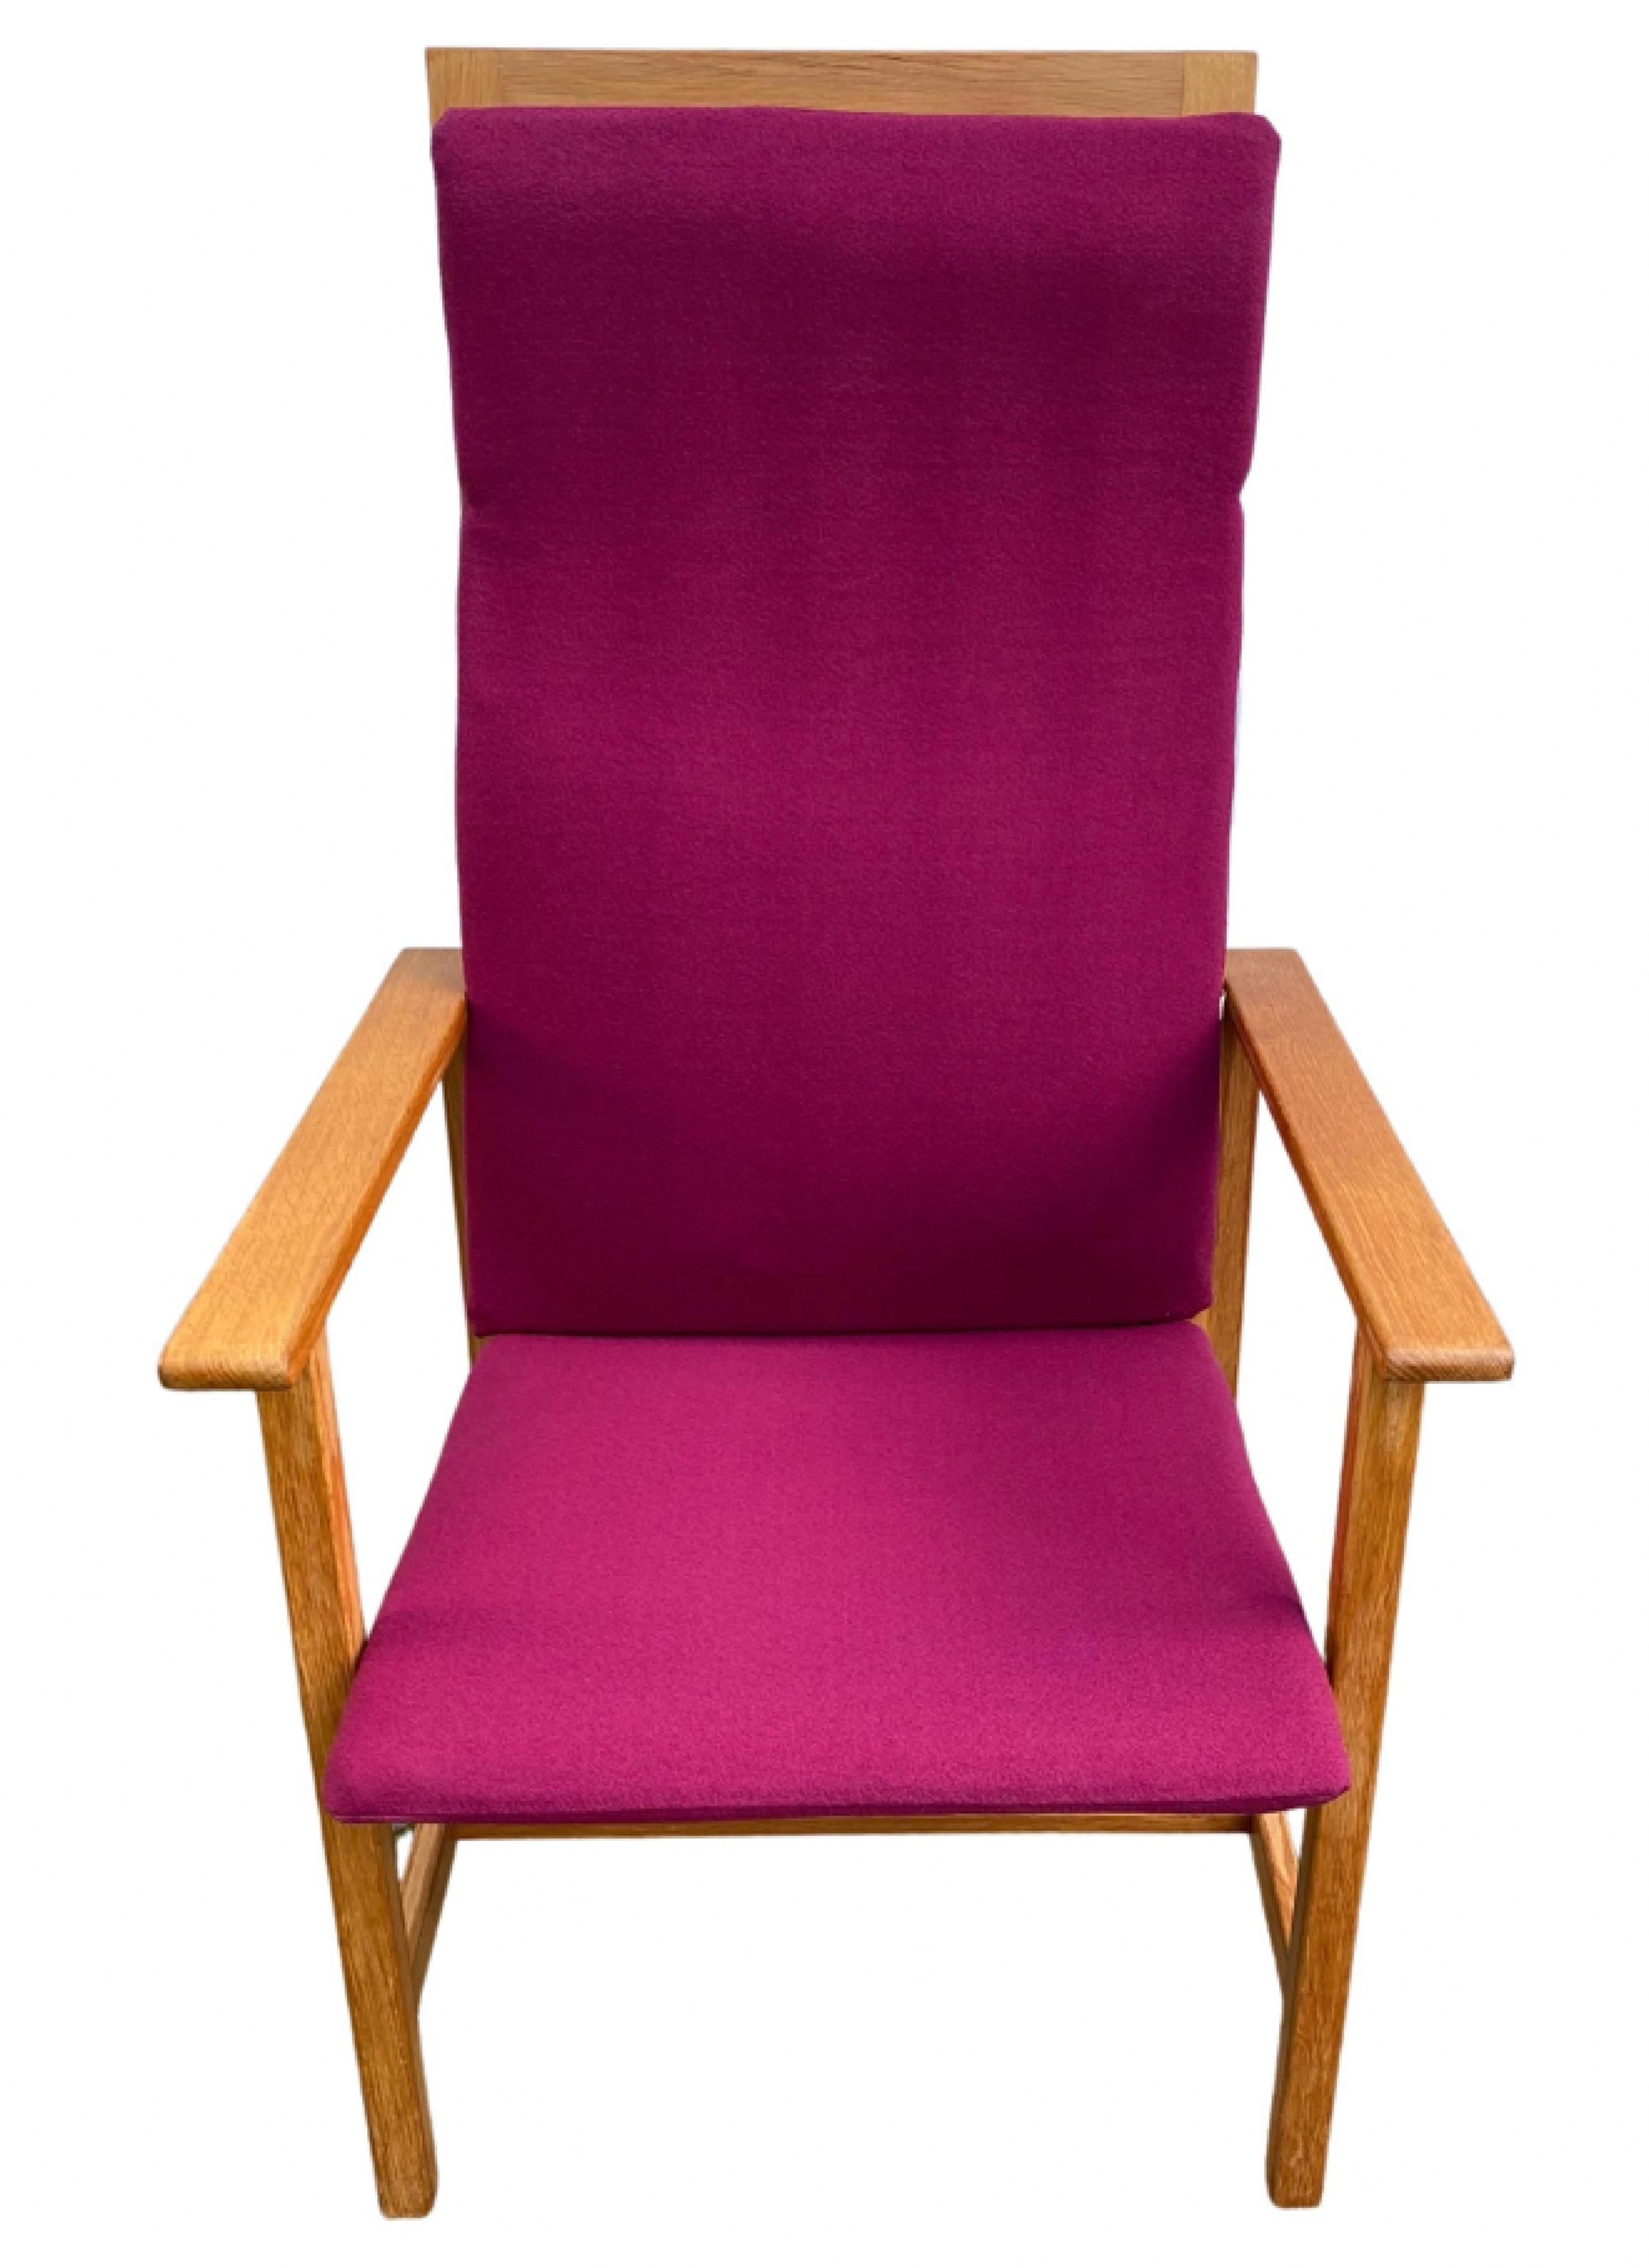 Elegant armchair designed by famous Danish designer Børge Mogensen in 1969.

Model 2258.

Original cover. Solid oak. Perfect condition.

Made for Fredericia Furniture.



NielsenClassics delivers the absolute highest quality of vintage Danish and